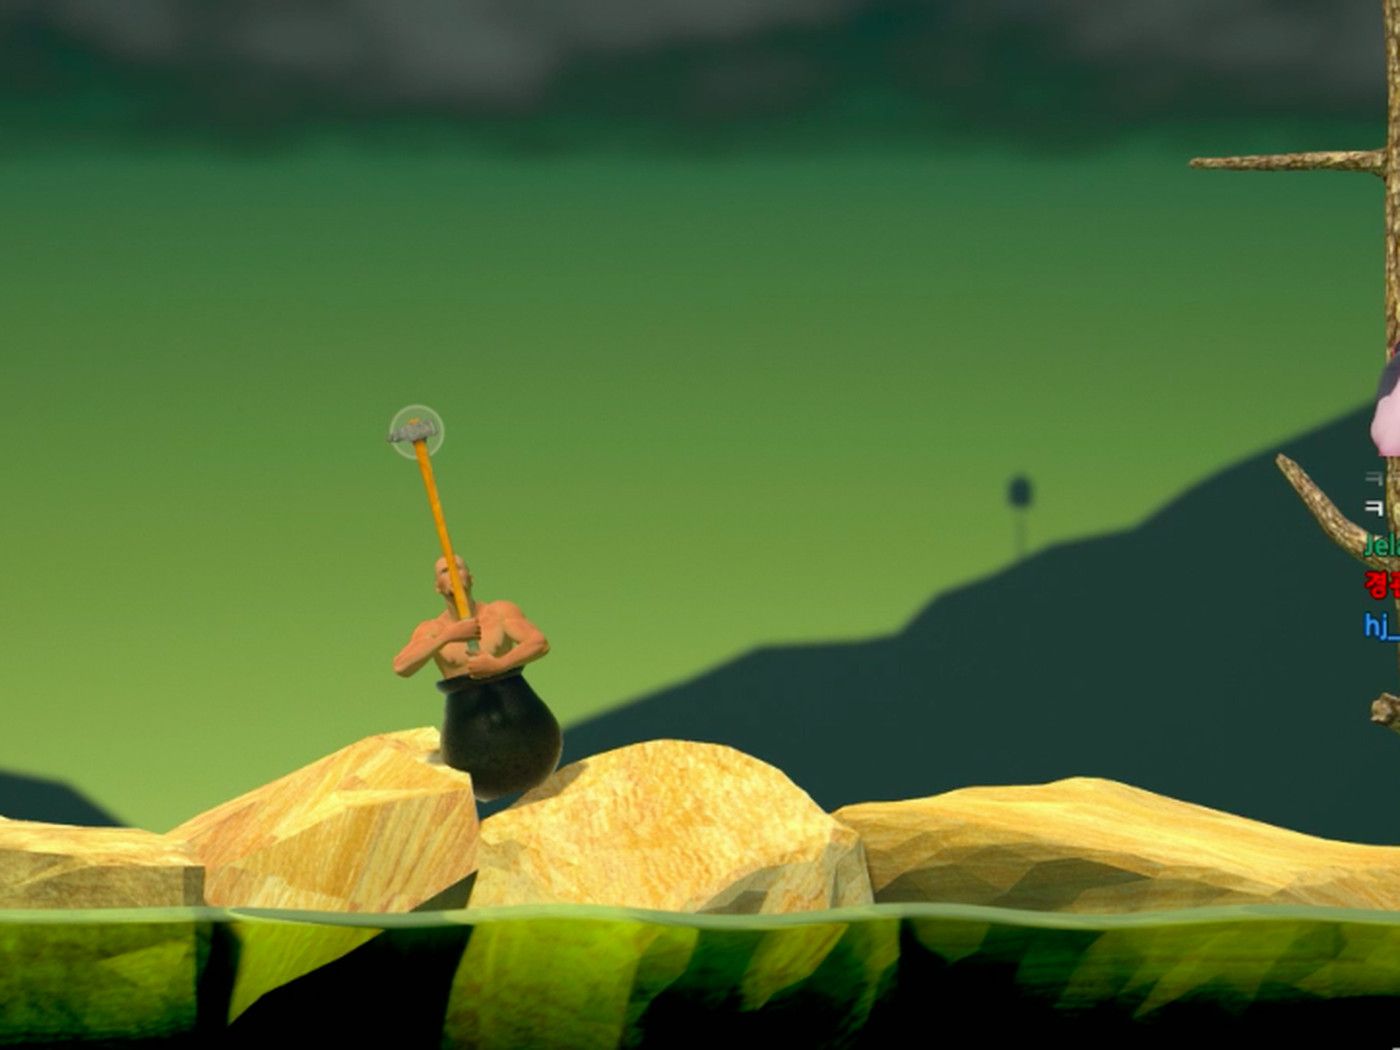 getting over it game download mac safe